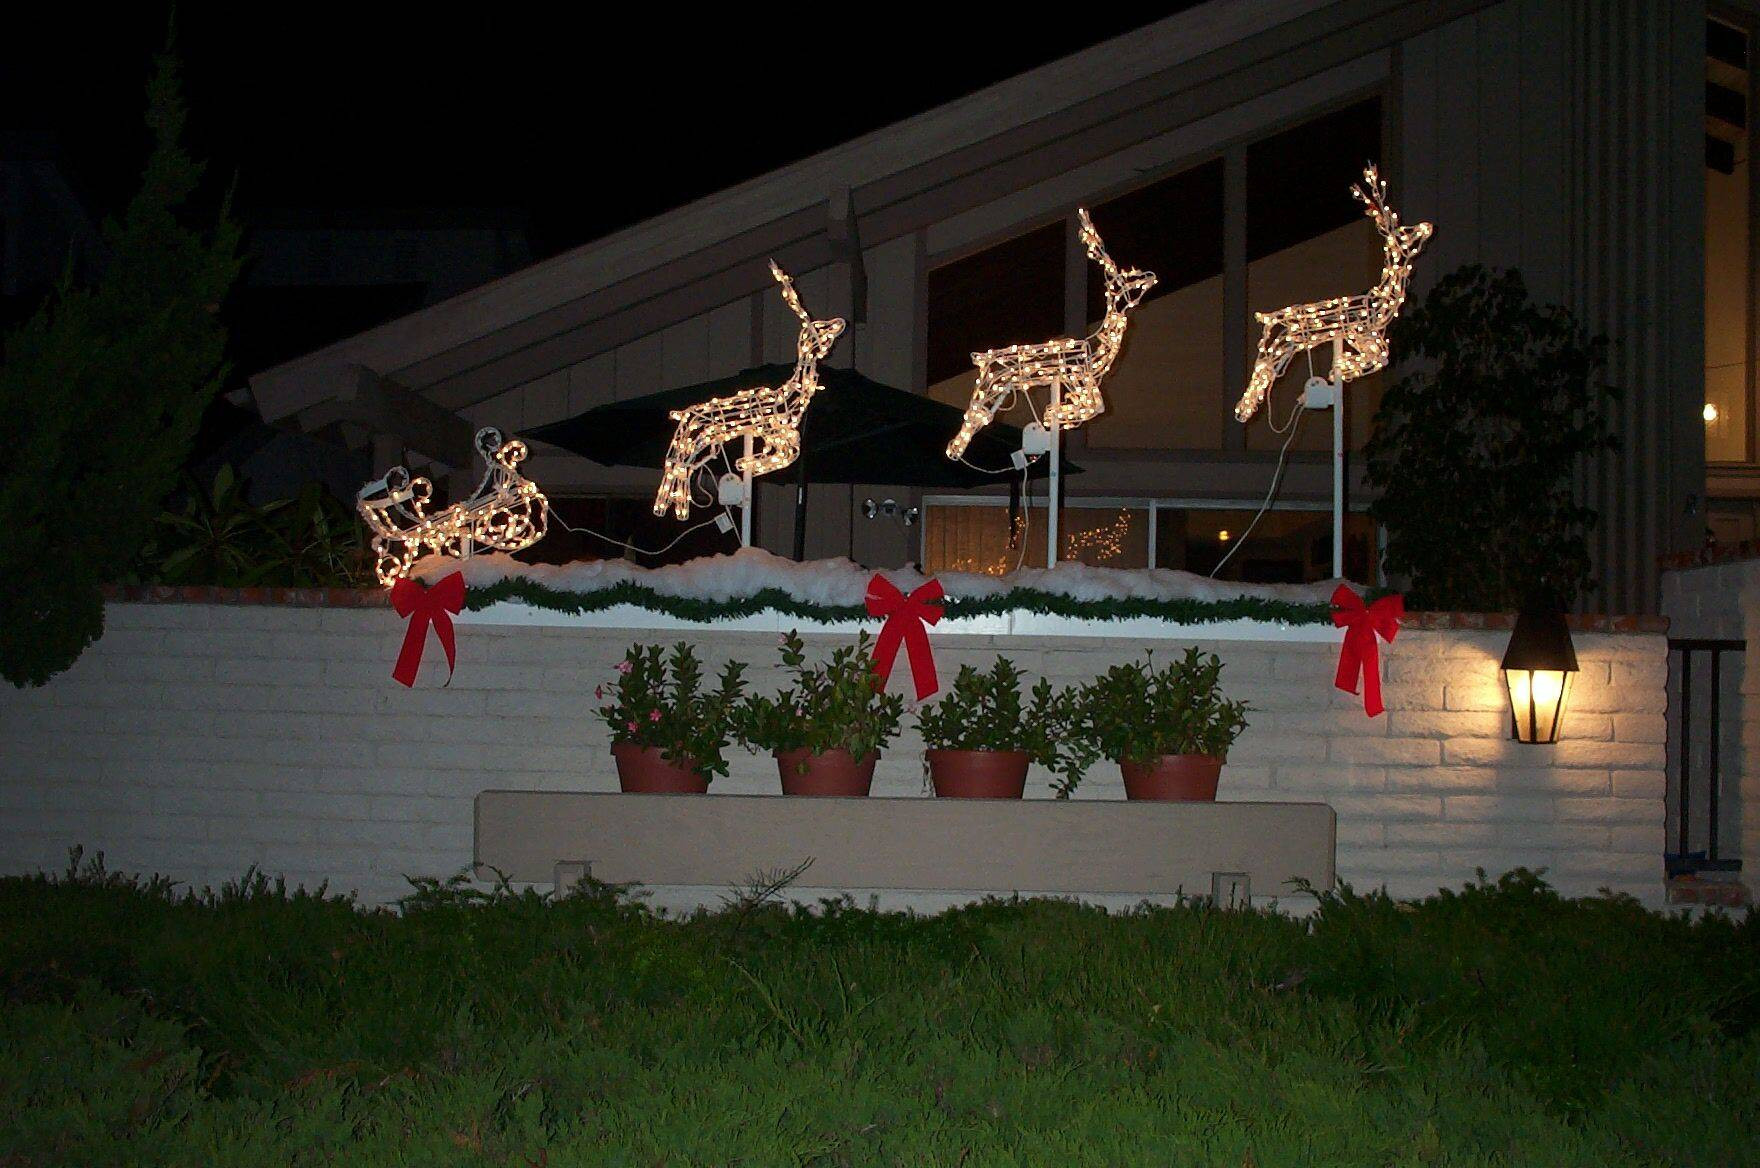 Outdoor Christmas Decorations Sale
 20 Outdoor Christmas Decorations Ideas for this Year MagMent